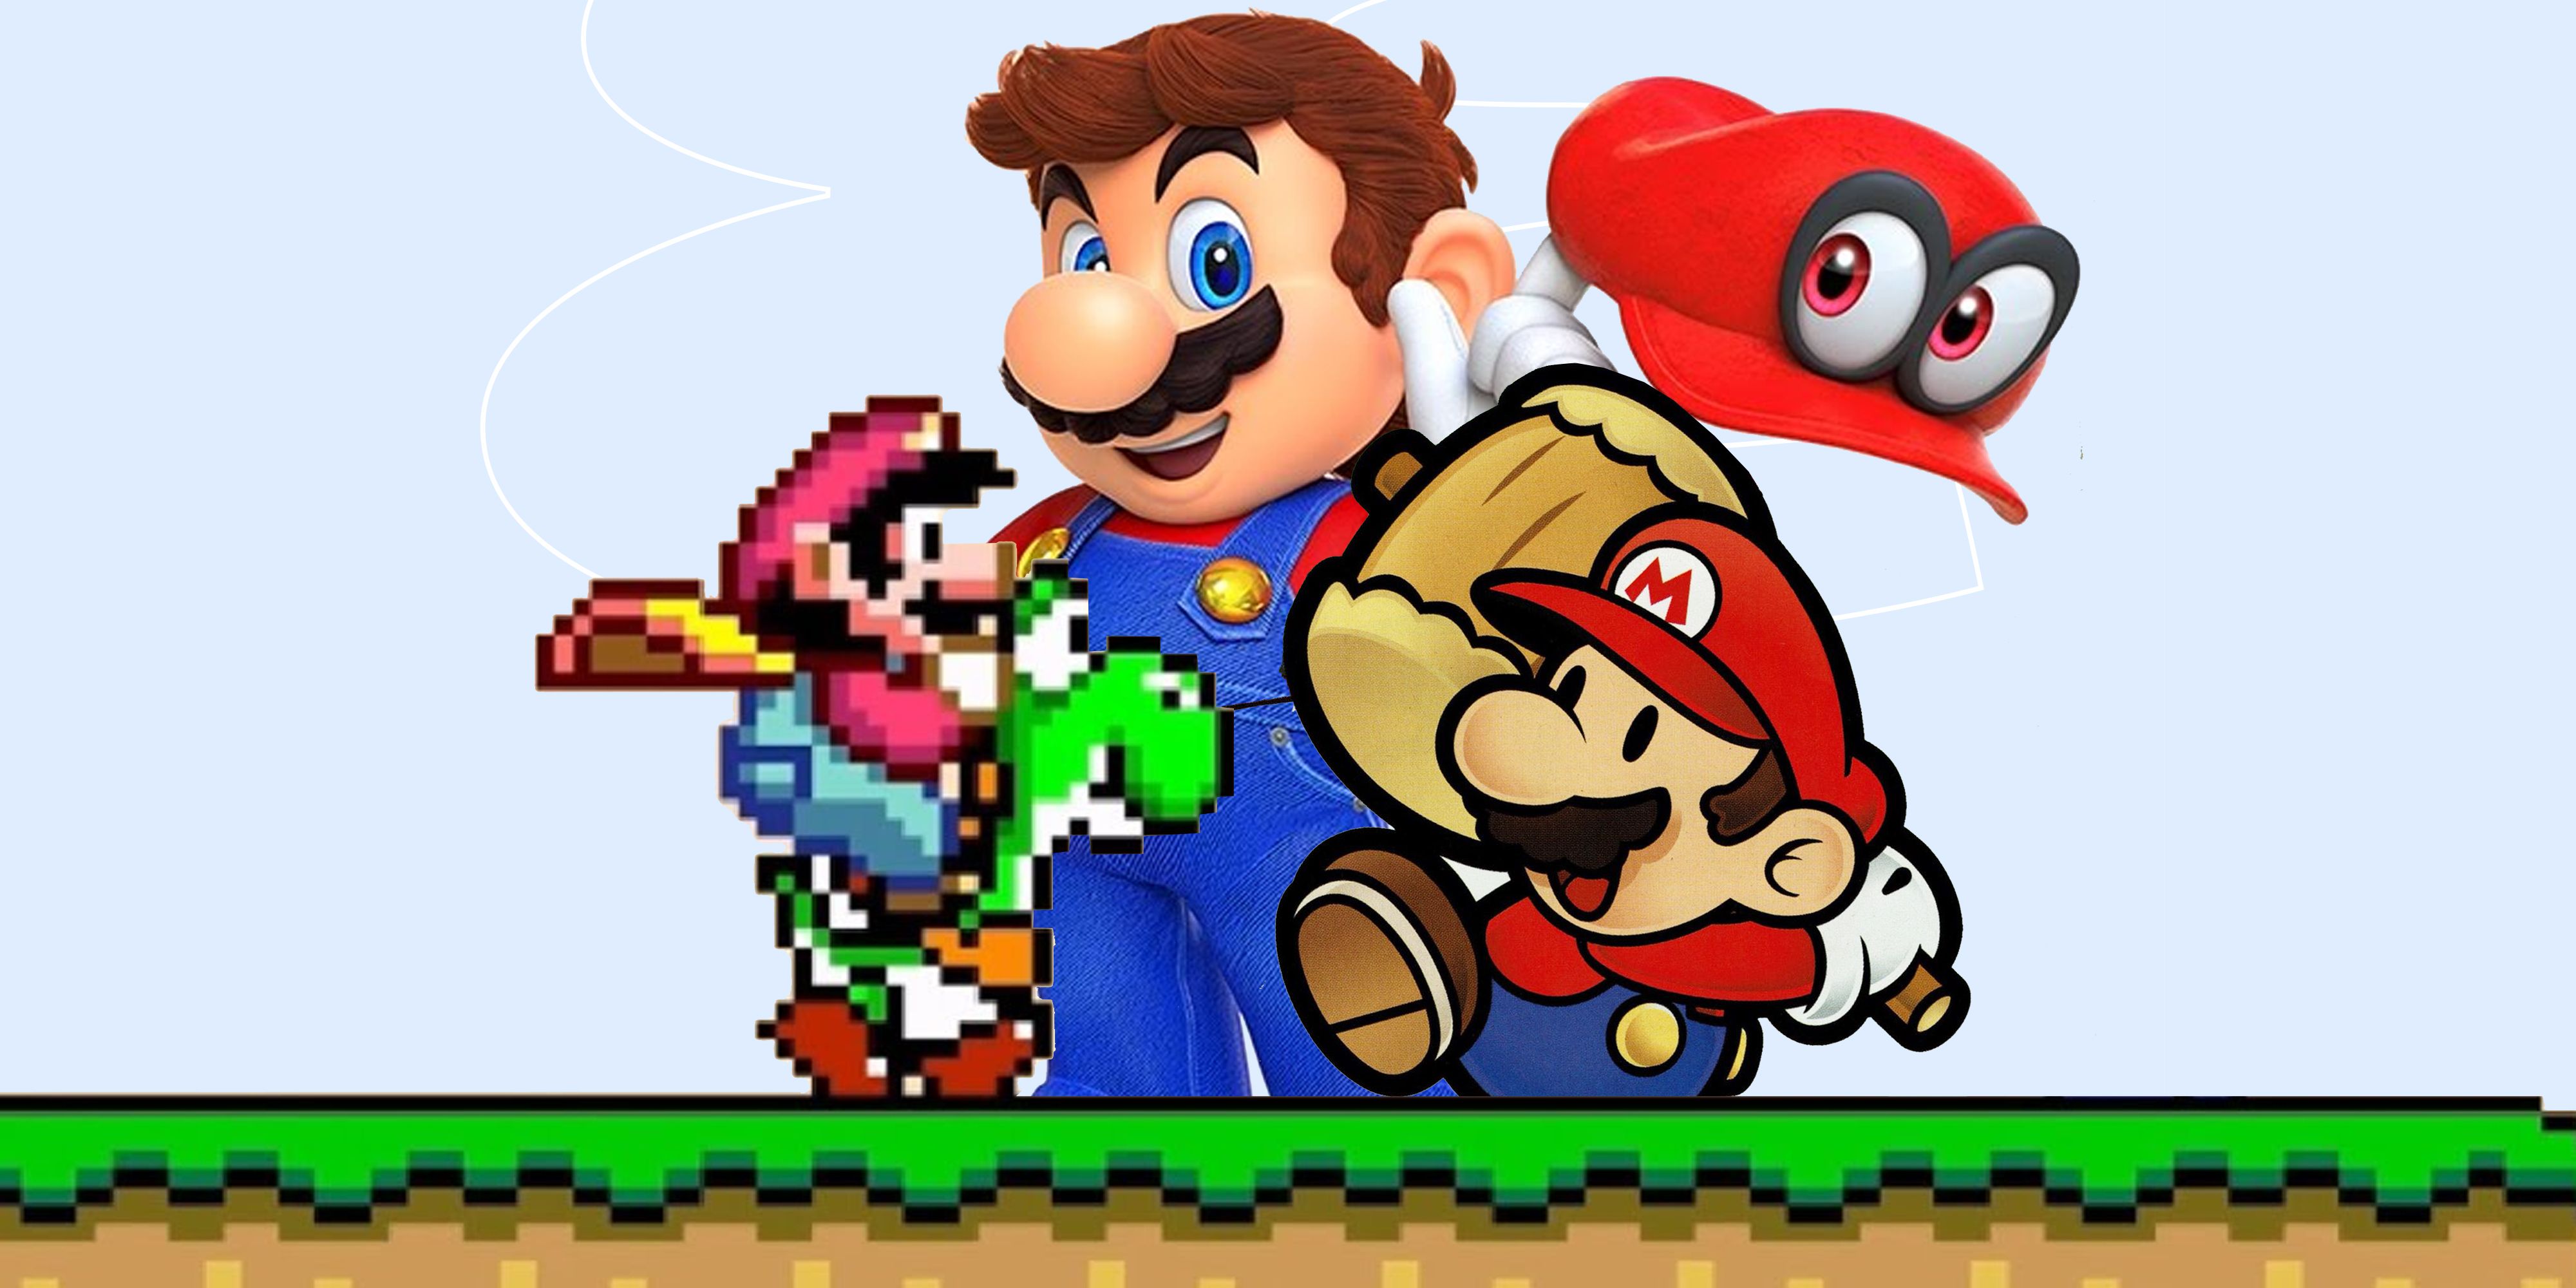 Classic Platformers: Experience the iconic side-scrolling adventures of Mario in titles like Super Mario Bros., Super Mario World, and New Super Mario Bros.
Mario Kart Series: Engage in fast-paced and competitive racing action with friends and family in games such as Mario Kart 8 Deluxe and Mario Kart Tour.